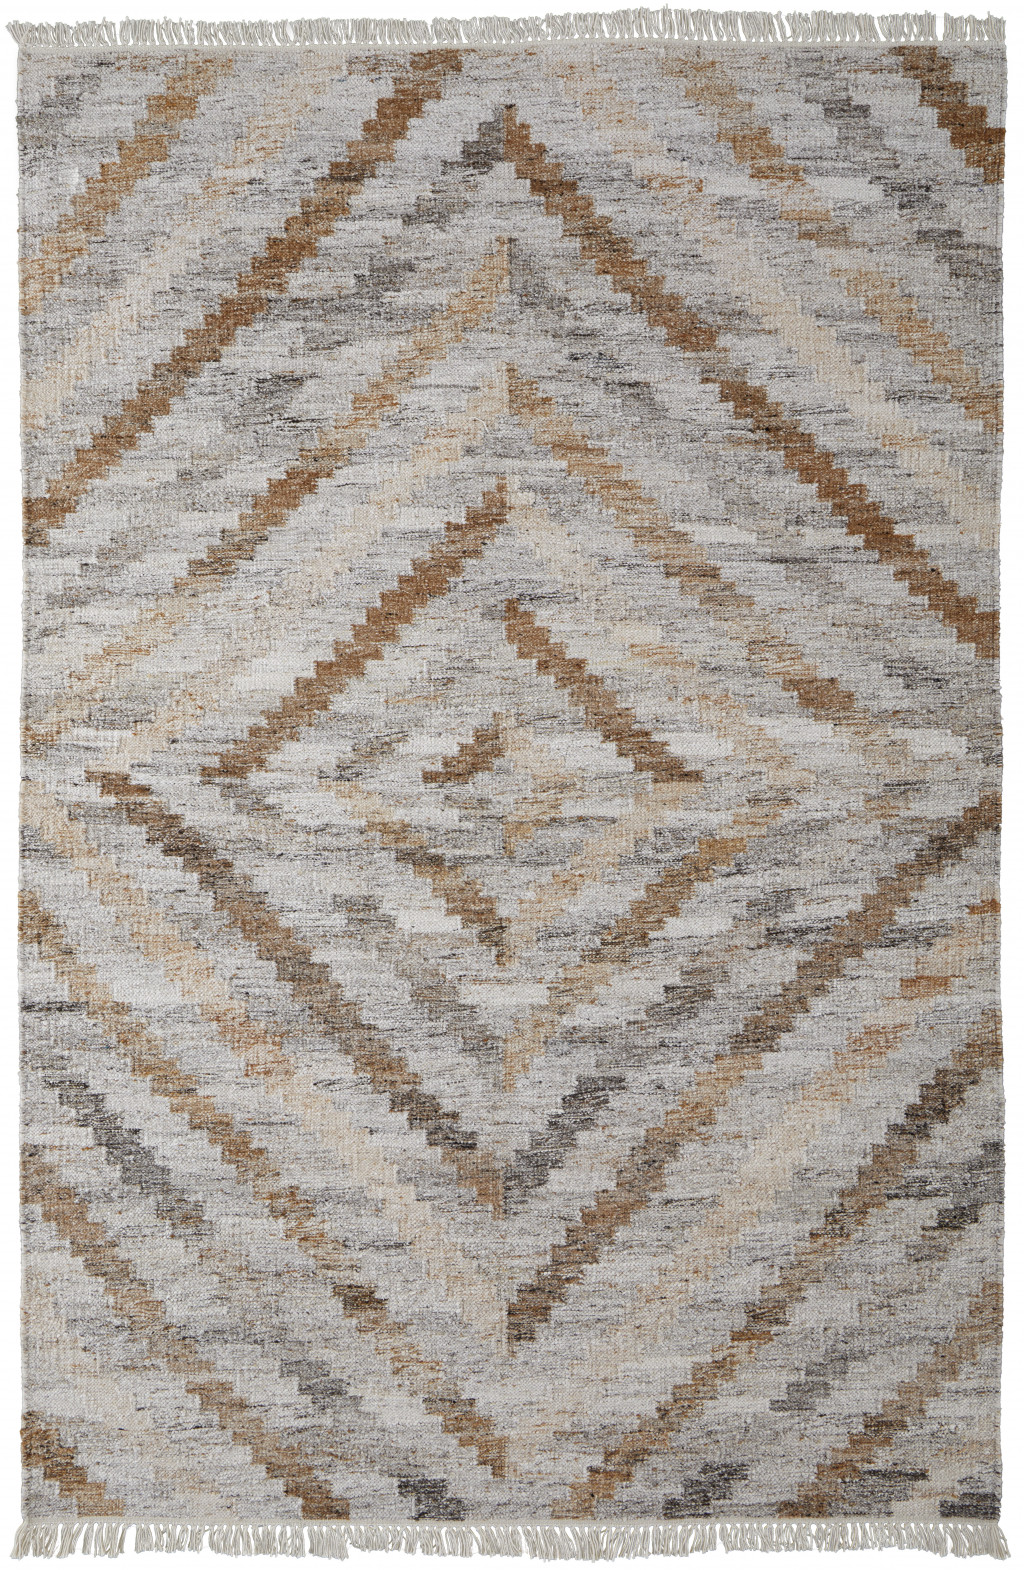 2' X 3' Ivory Gray And Tan Geometric Hand Woven Stain Resistant Area Rug With Fringe-512427-1